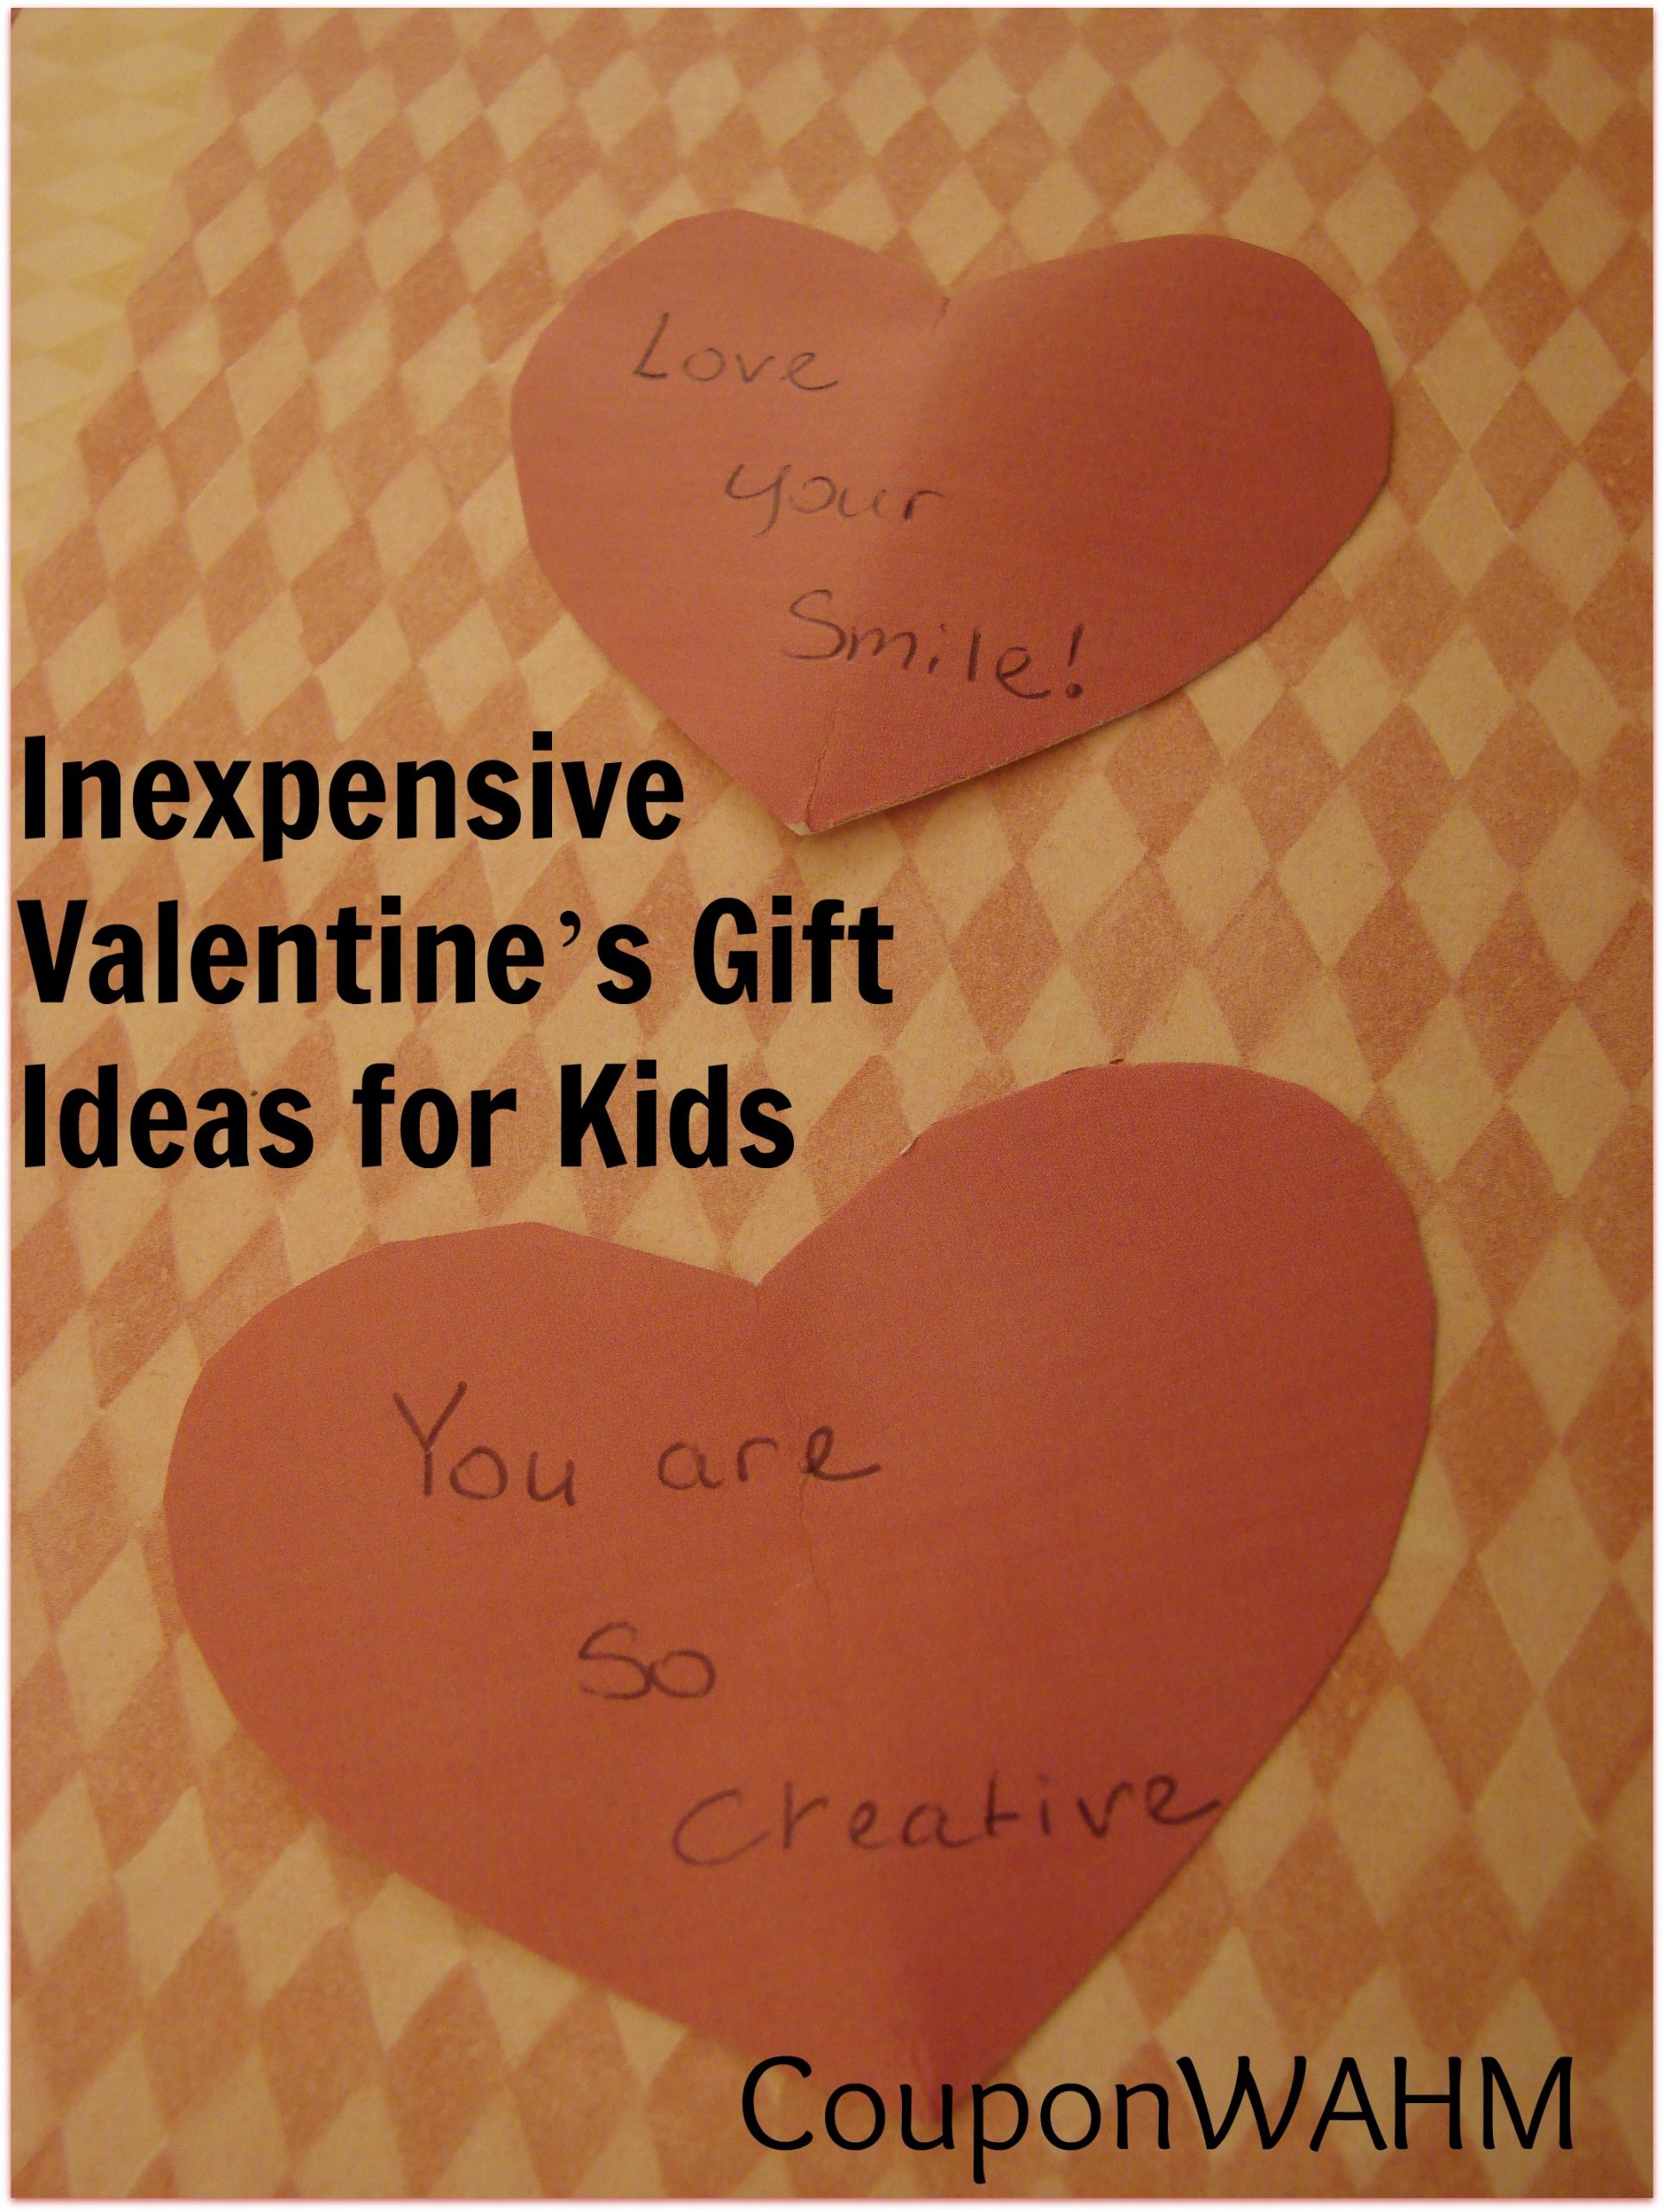 Inexpensive Valentines Gift Ideas
 Inexpensive Valentine’s Gift Ideas for Kids – Coupon WAHM